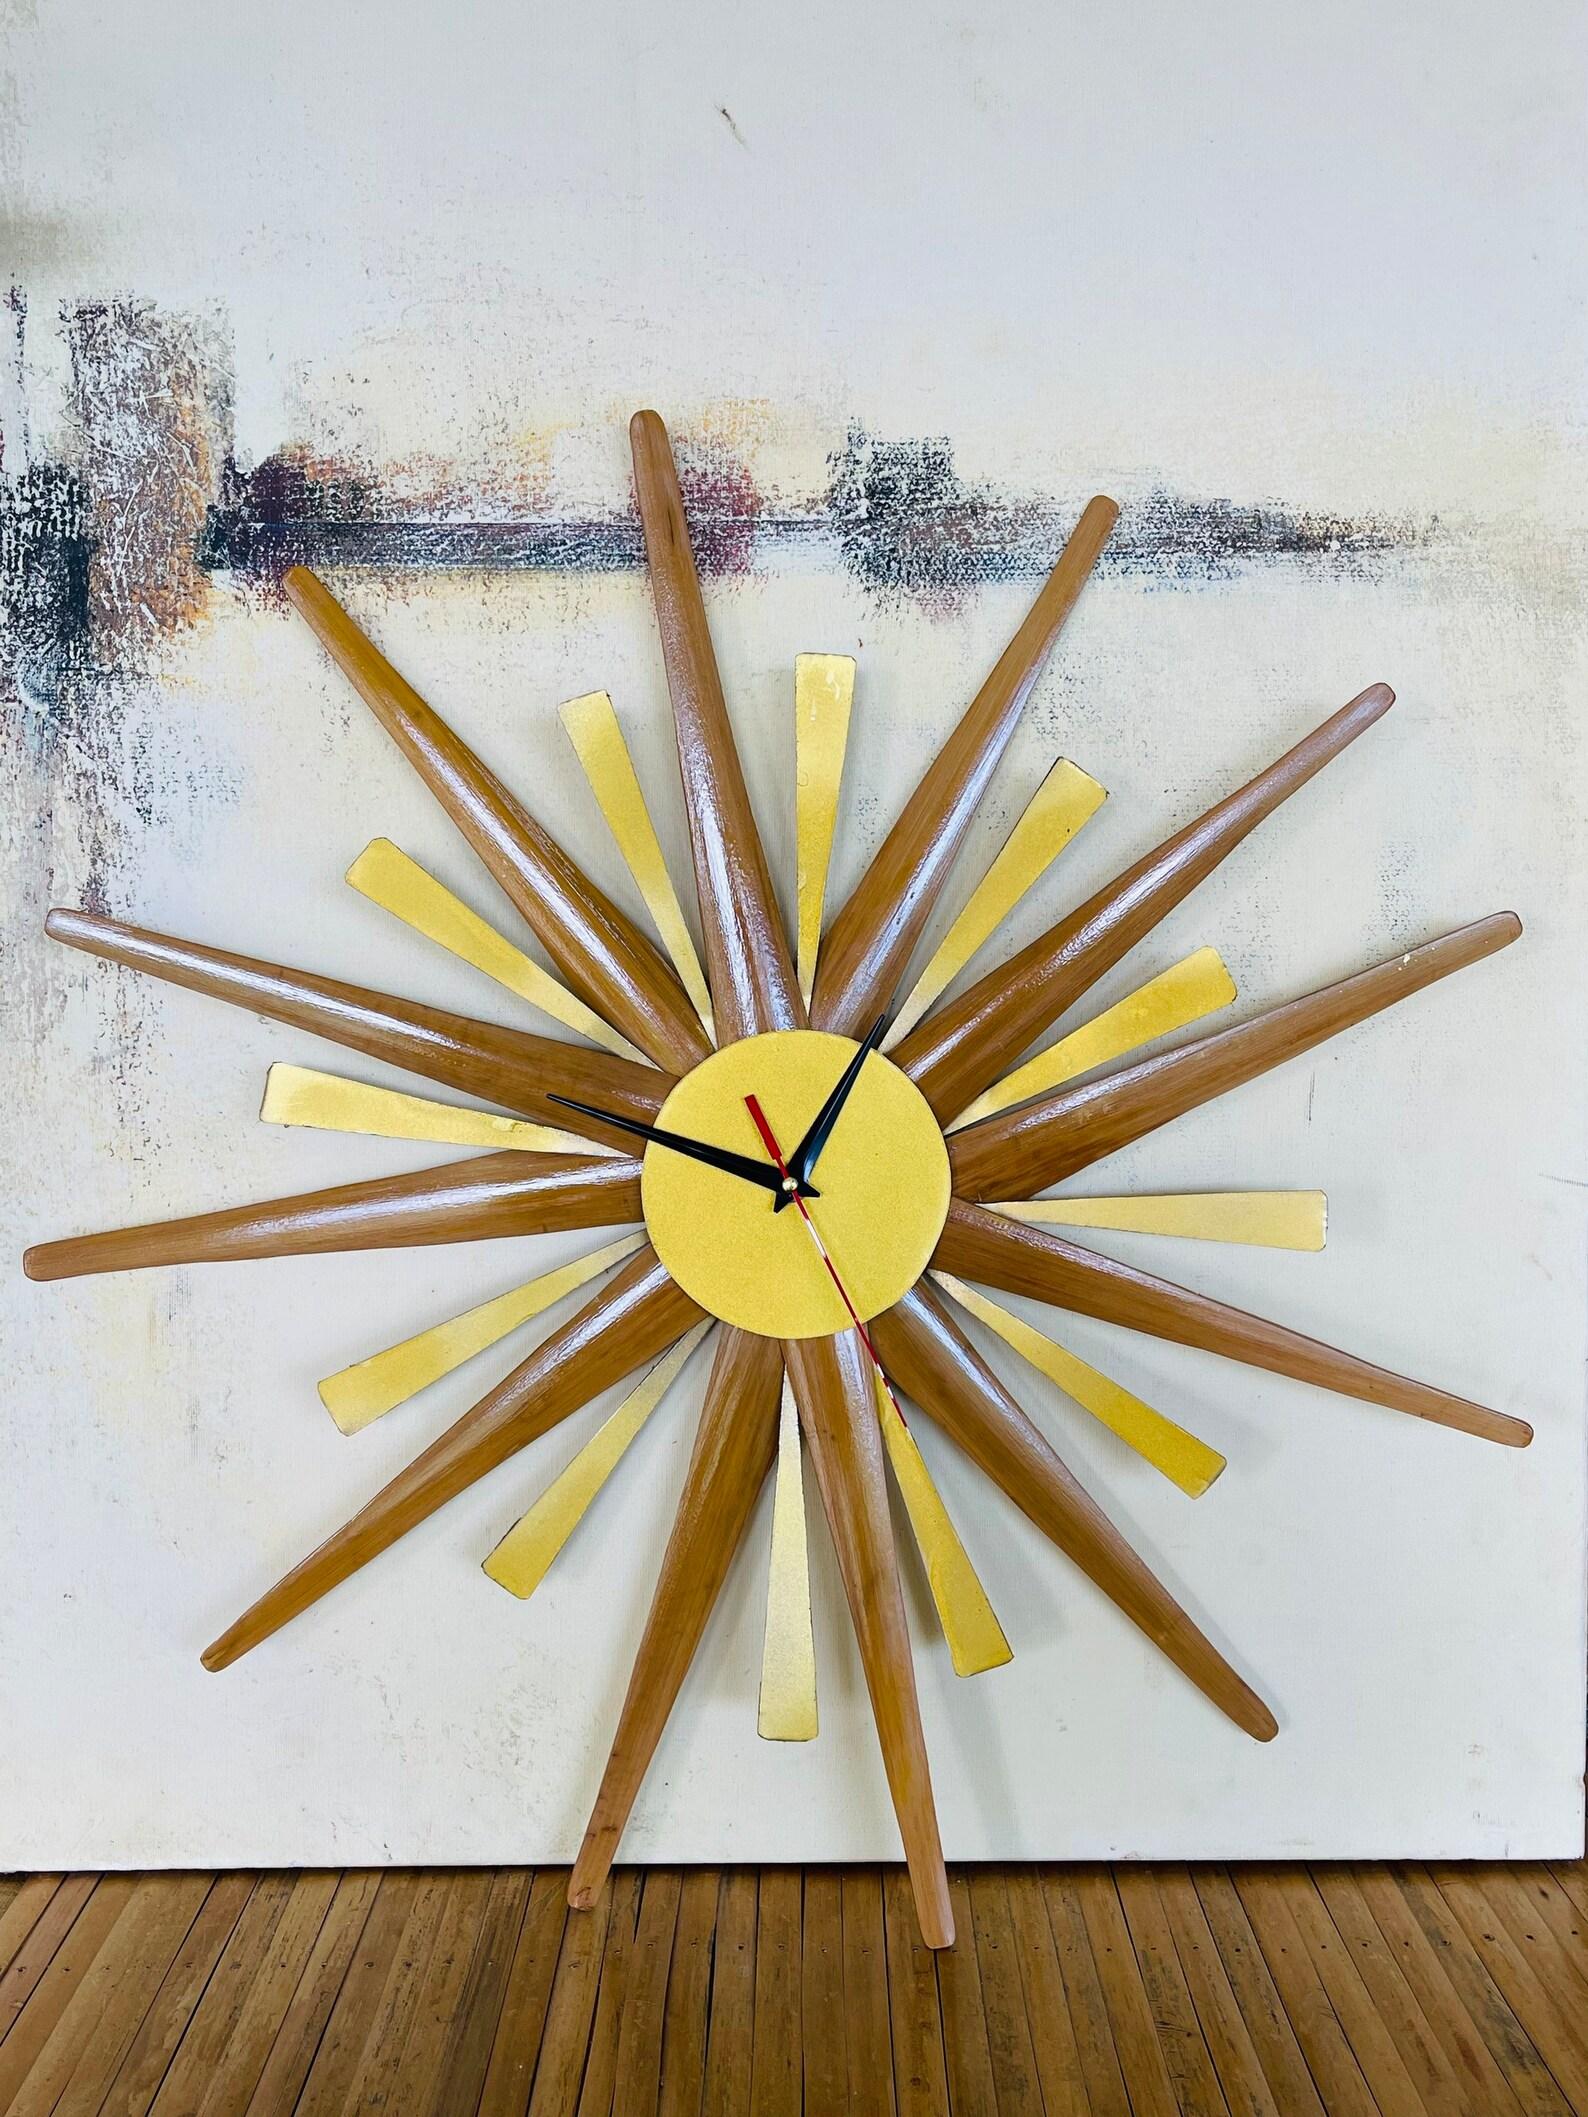 This is a high-quality natural rattan and bamboo mid-century style Starburst Clock Hand crafted by the local artisans in the Philippines

The clock measures 40cm in diameter

Organic Bamboo with clear lacquer (All bamboo pieces were treated with